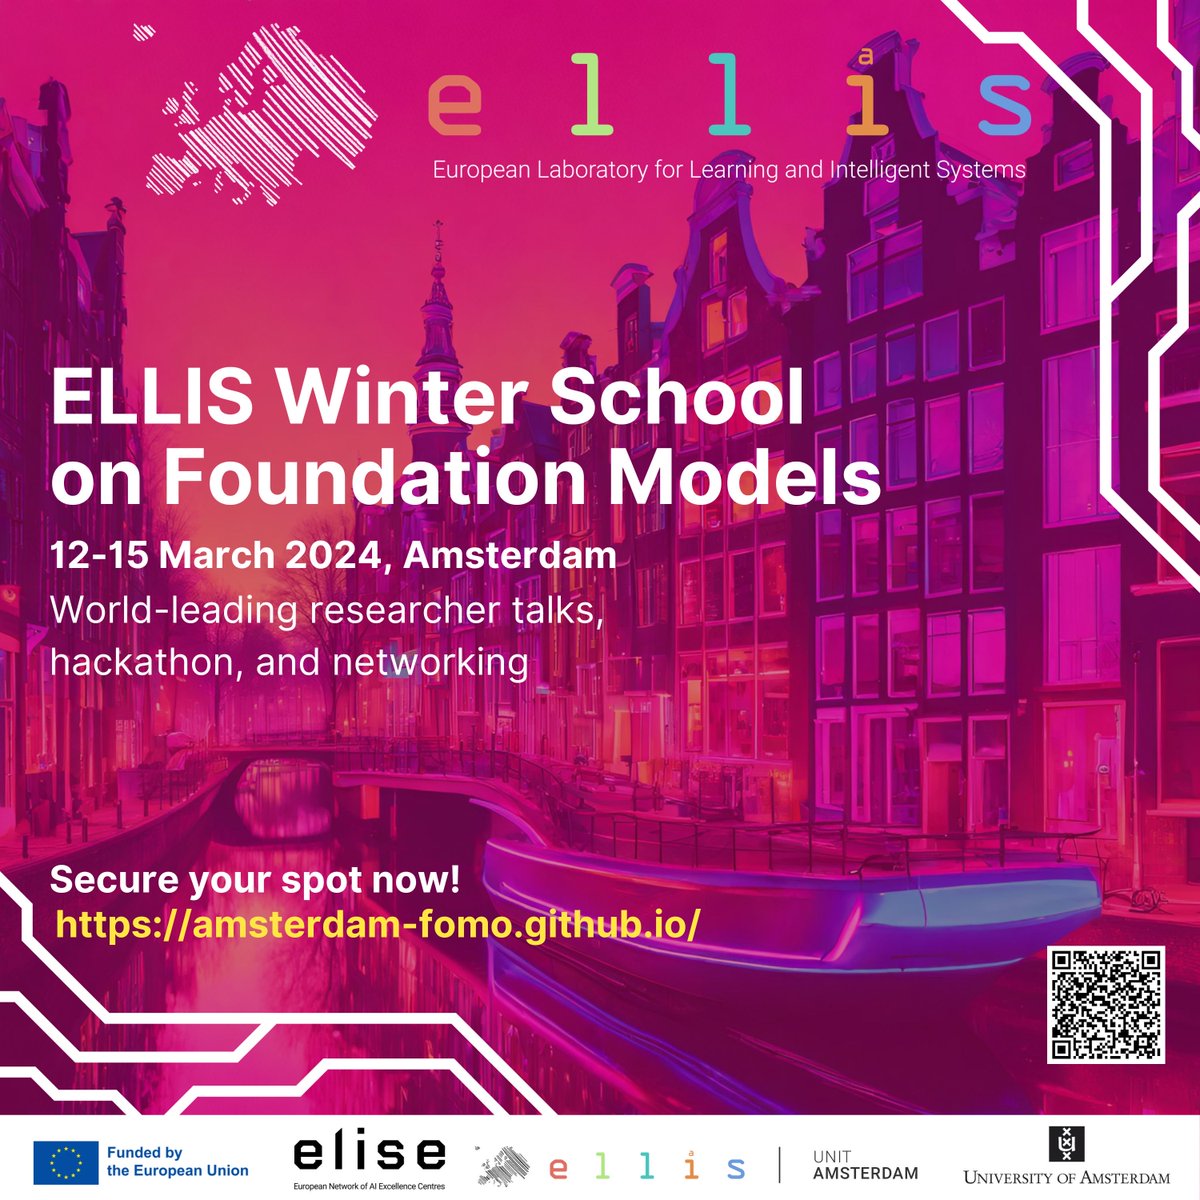 📣From LLMs, LSTMs and Gemini, to Diffusion, VLMs and NeRF: join our ELLIS Winter School on Foundation Models in Amsterdam!✨ 🚀 ❄️ 📅 March 12-15, 2024 📍@UvA_IvI 🌐 amsterdam-fomo.github.io #AI #ML #ELLISforEurope @ELLISforEurope @ai_elise @UvA_Amsterdam #winterschool